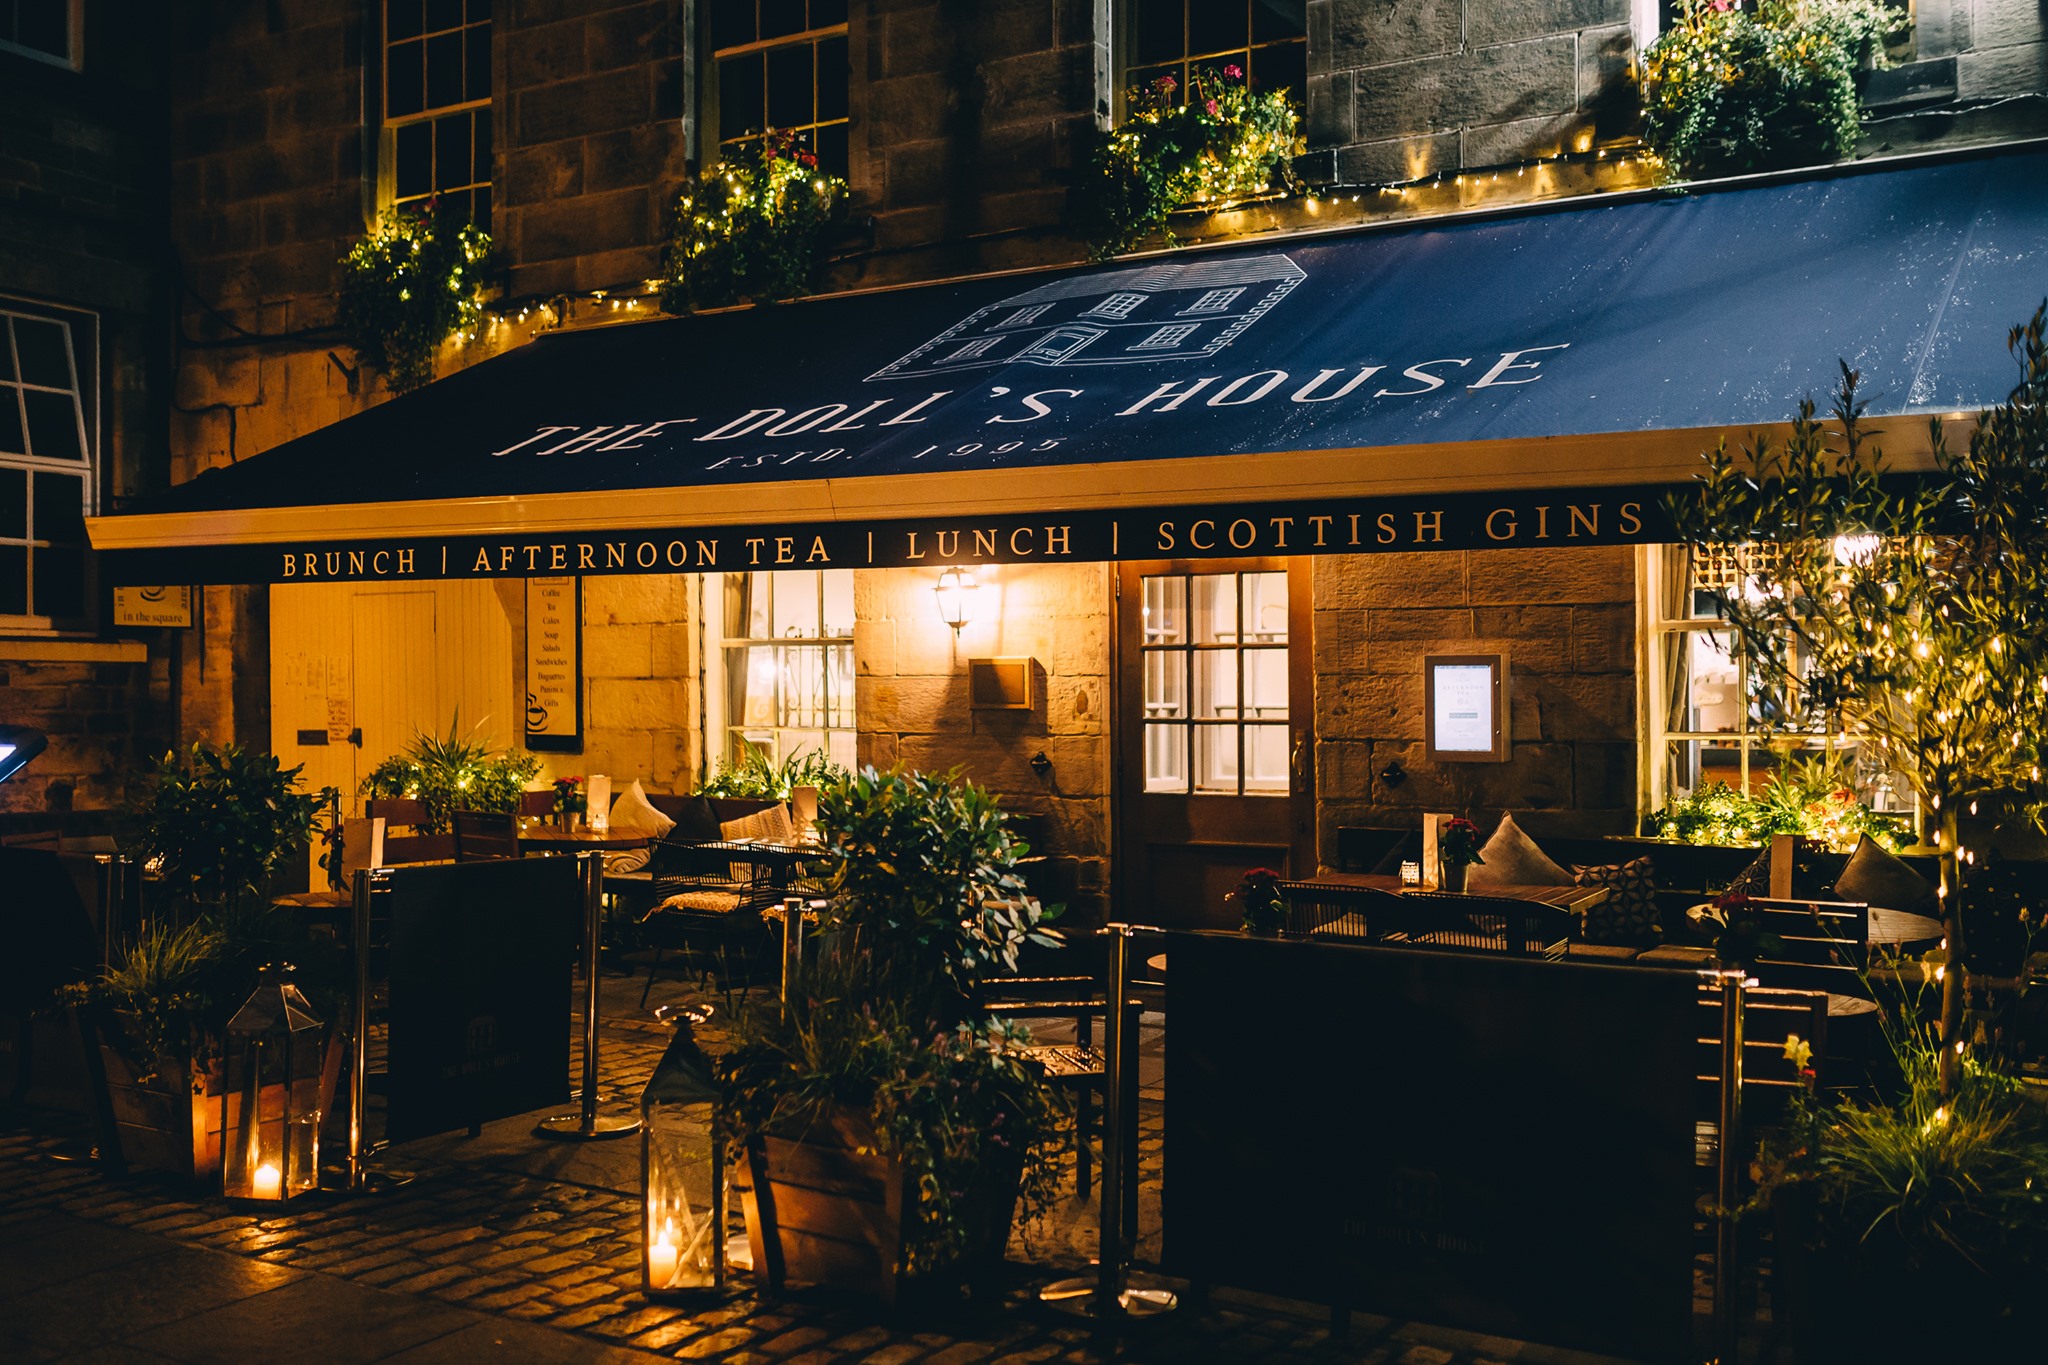 The Best Top 5 Restaurants in St Andrews, Scotland | Doll's House, St Andrews